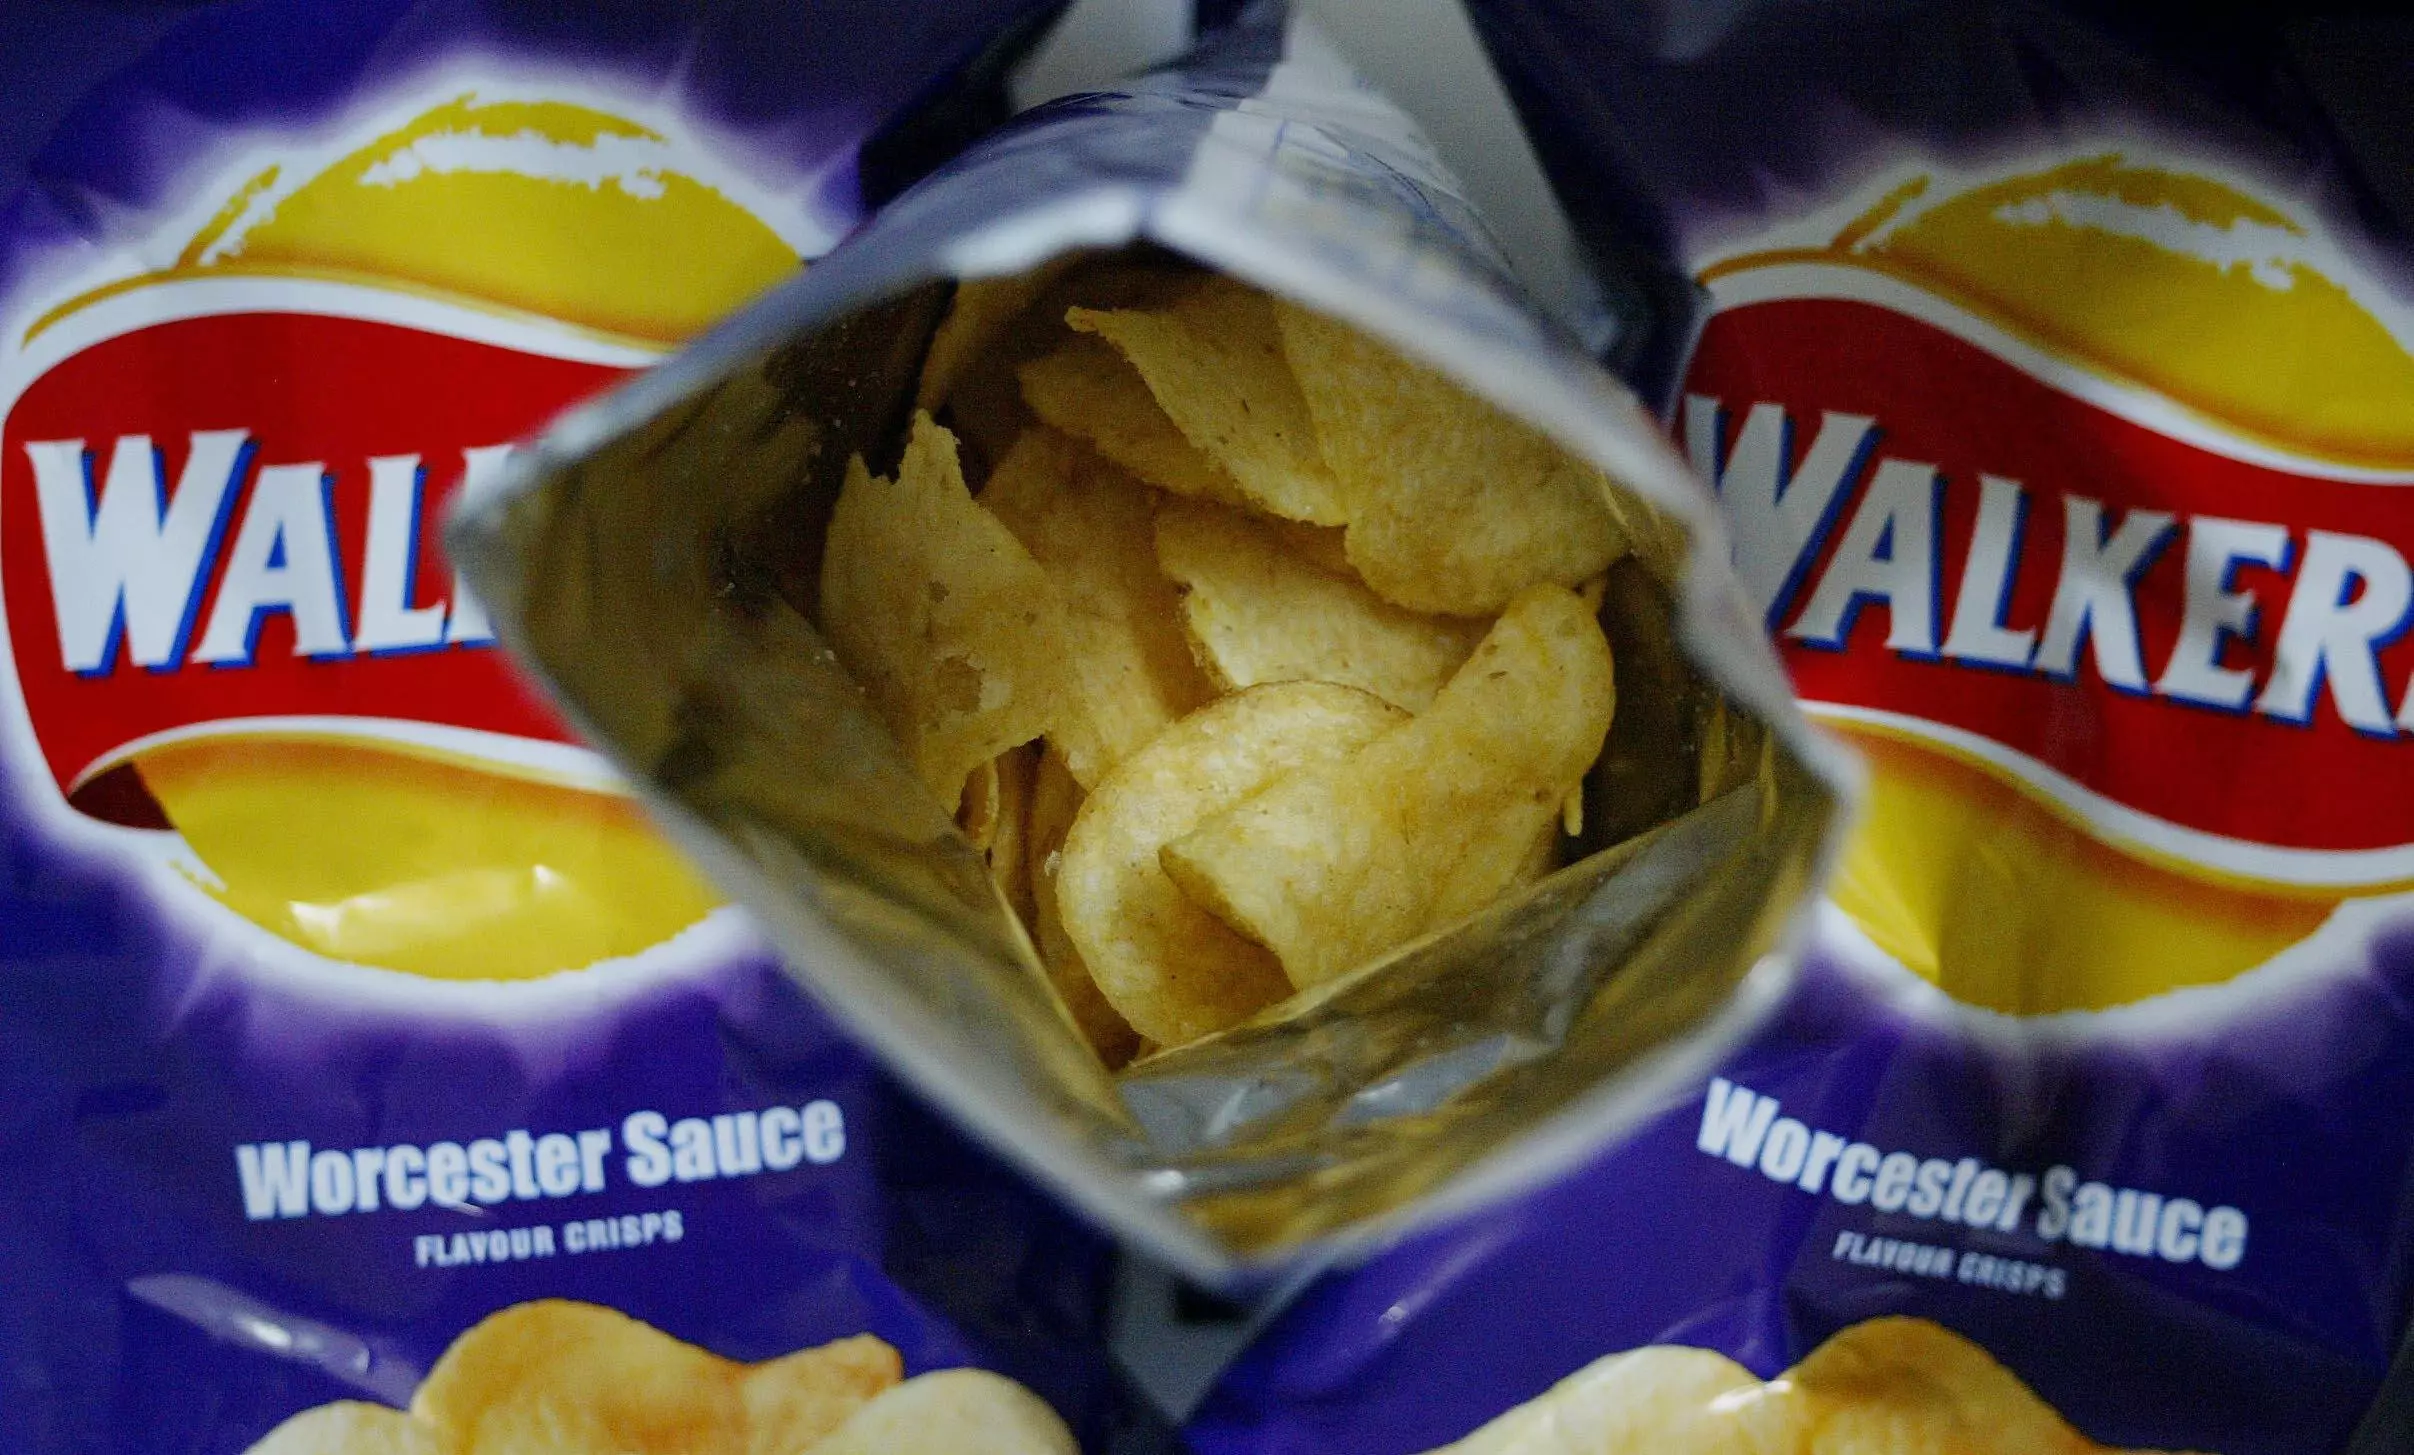 Dig Out Your P45 Because Walkers Is On The Hunt For A Taste Tester